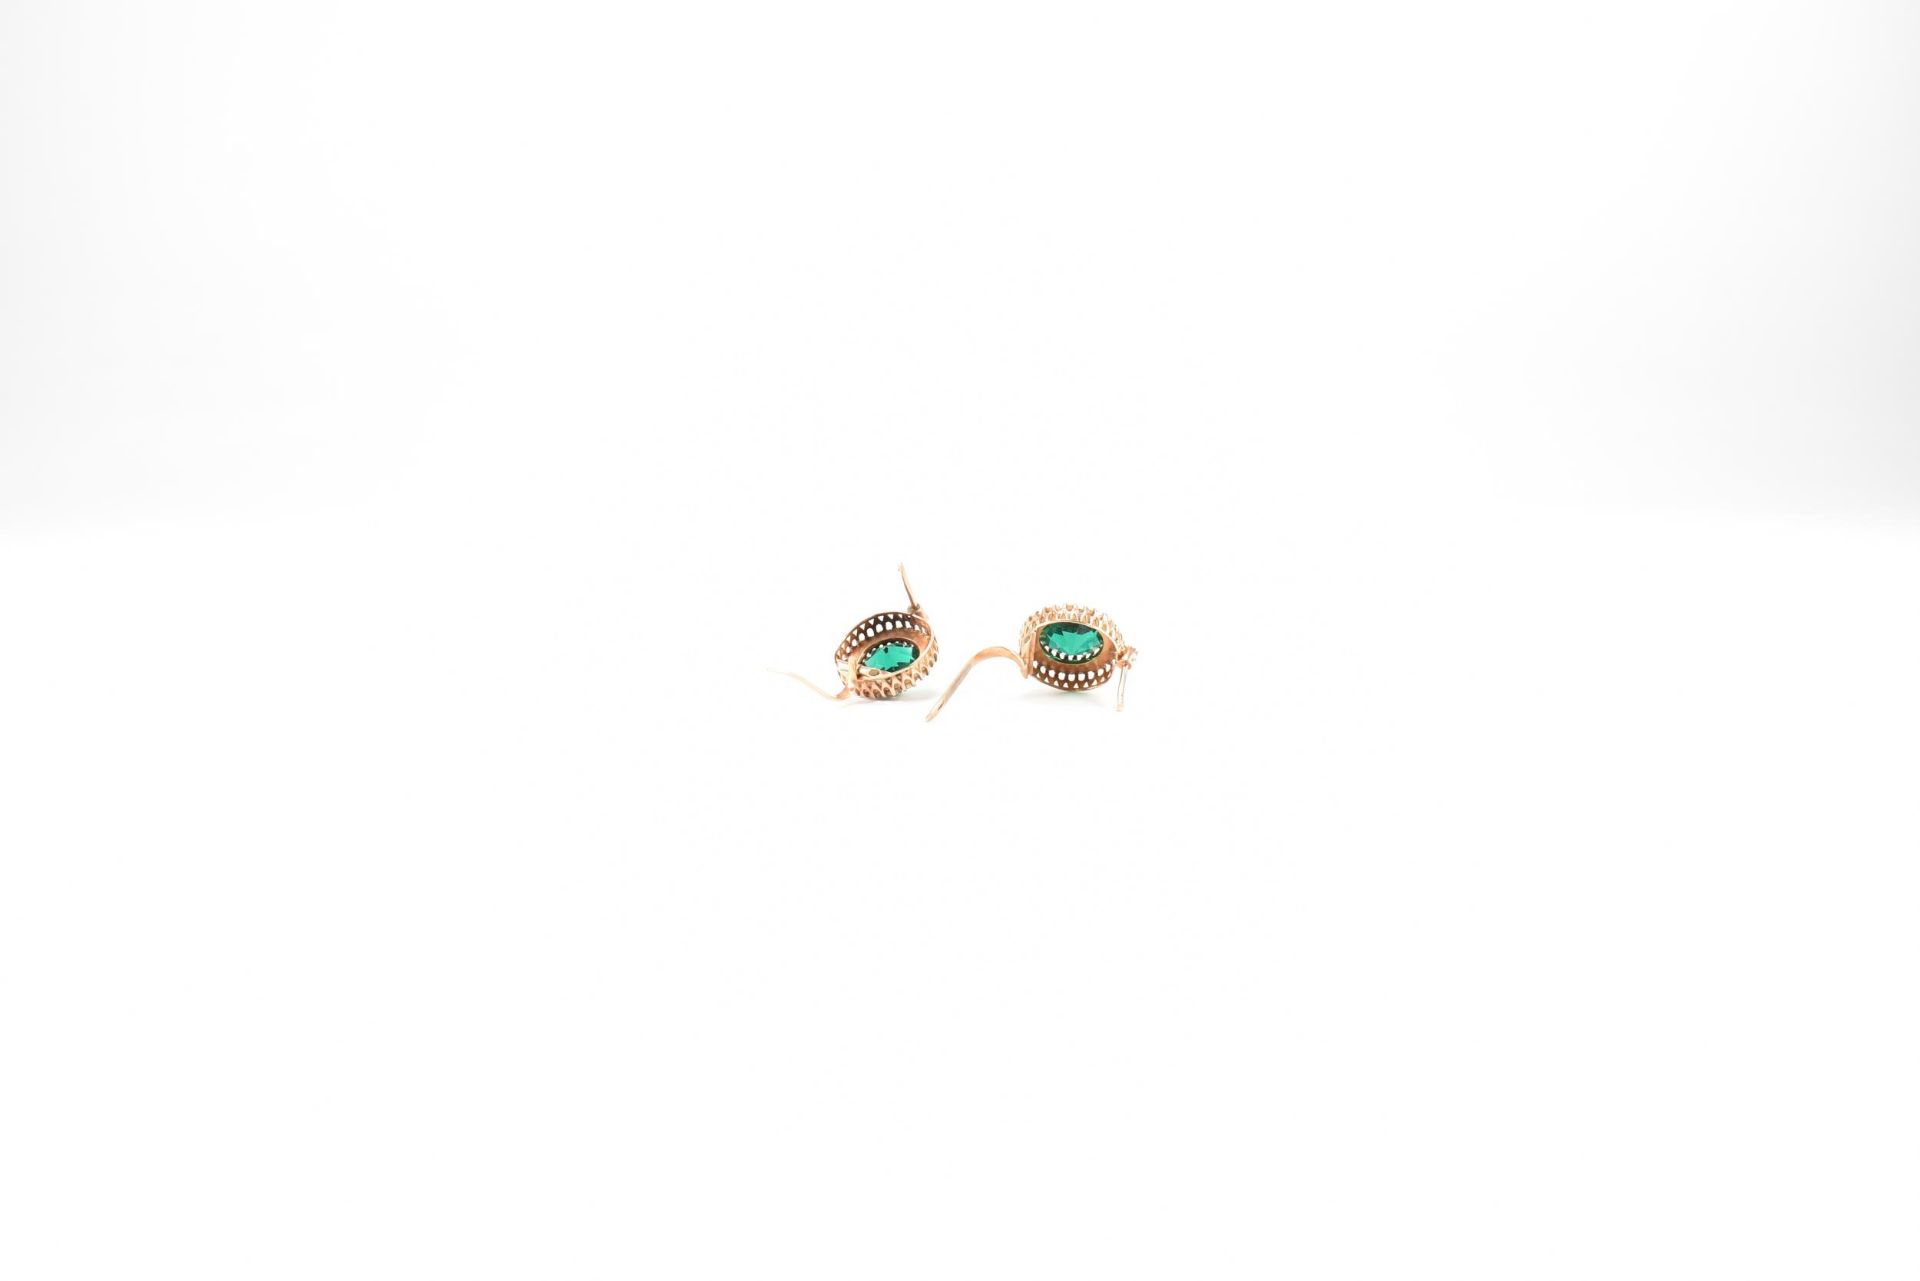 PAIR OF 14CT GOLD GREEN PASTE & PEARL EARRINGS - Image 4 of 4